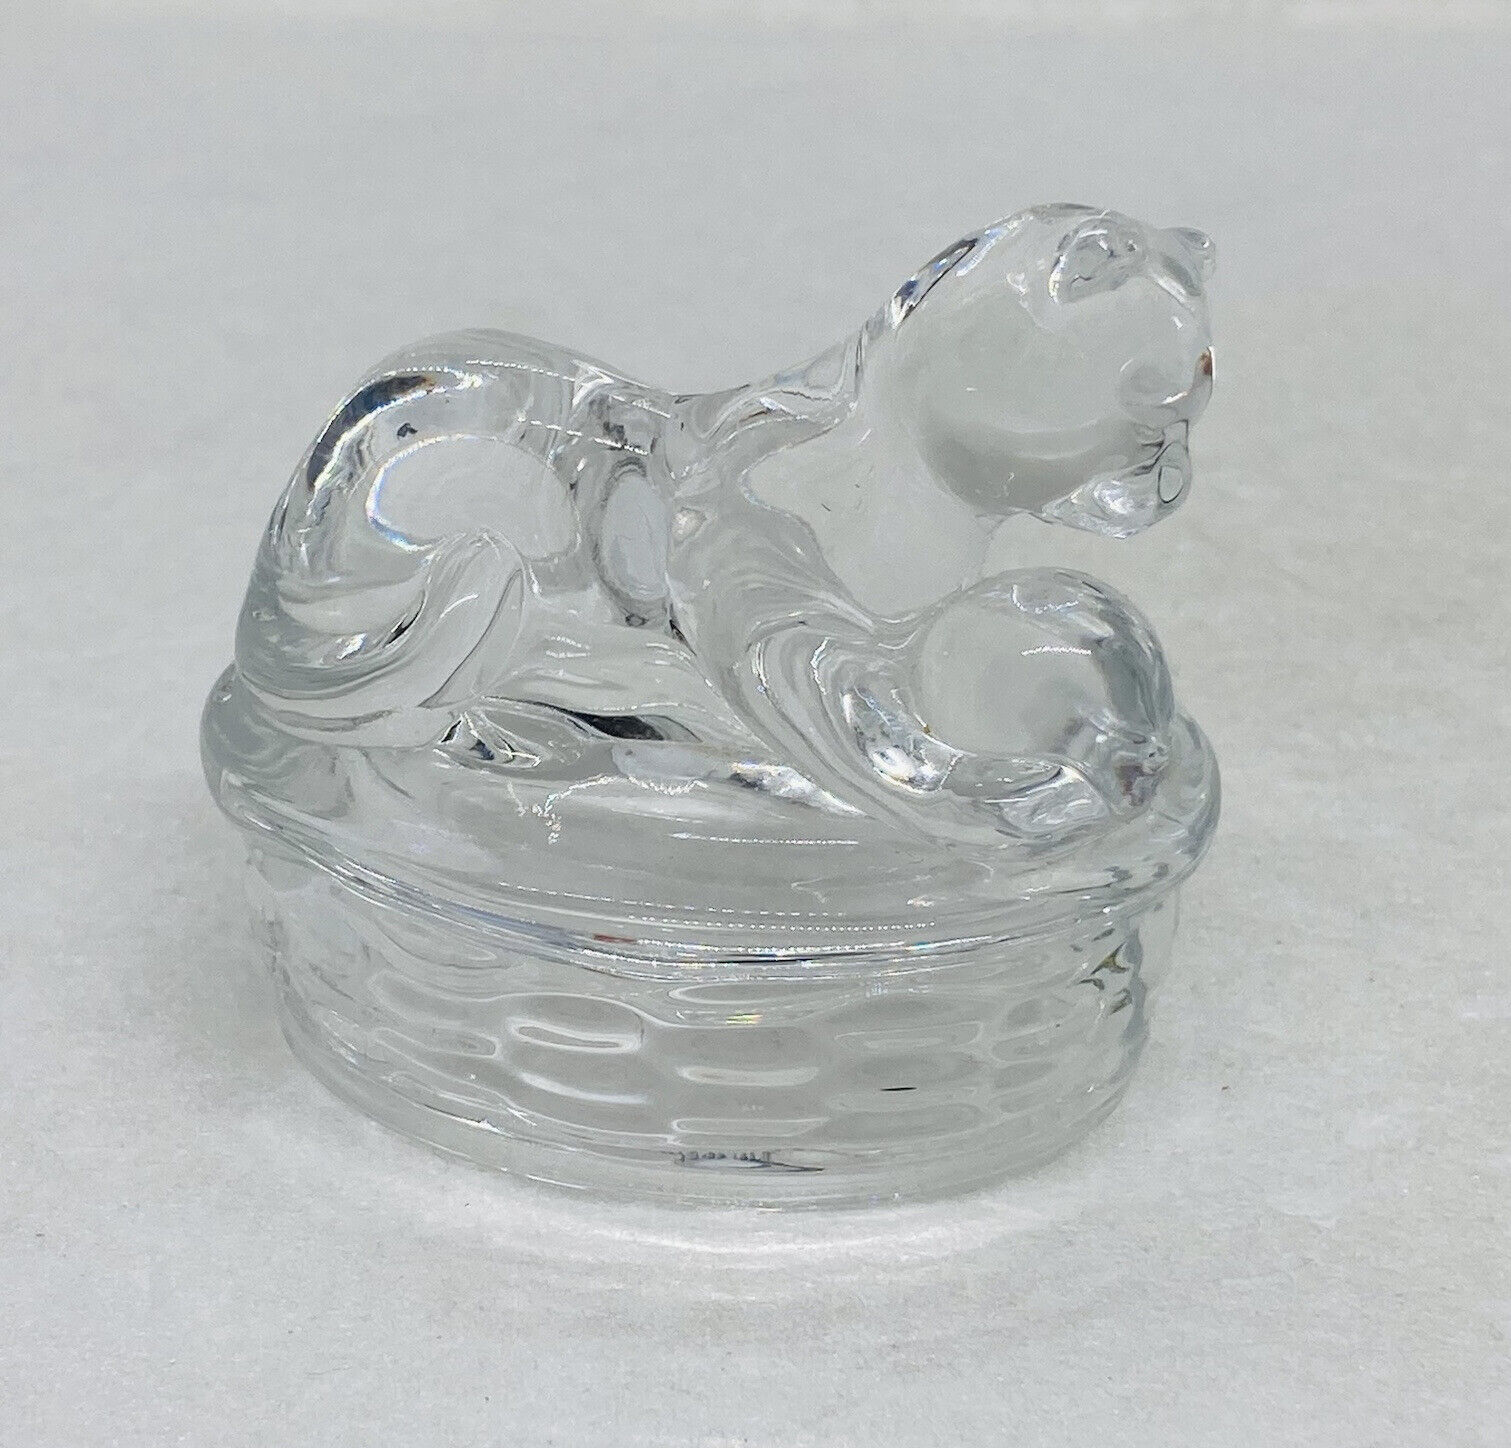 Vintage 1980s Crystal Glass Cat Playing With Ball Figurine 2.5” Art Decor C3